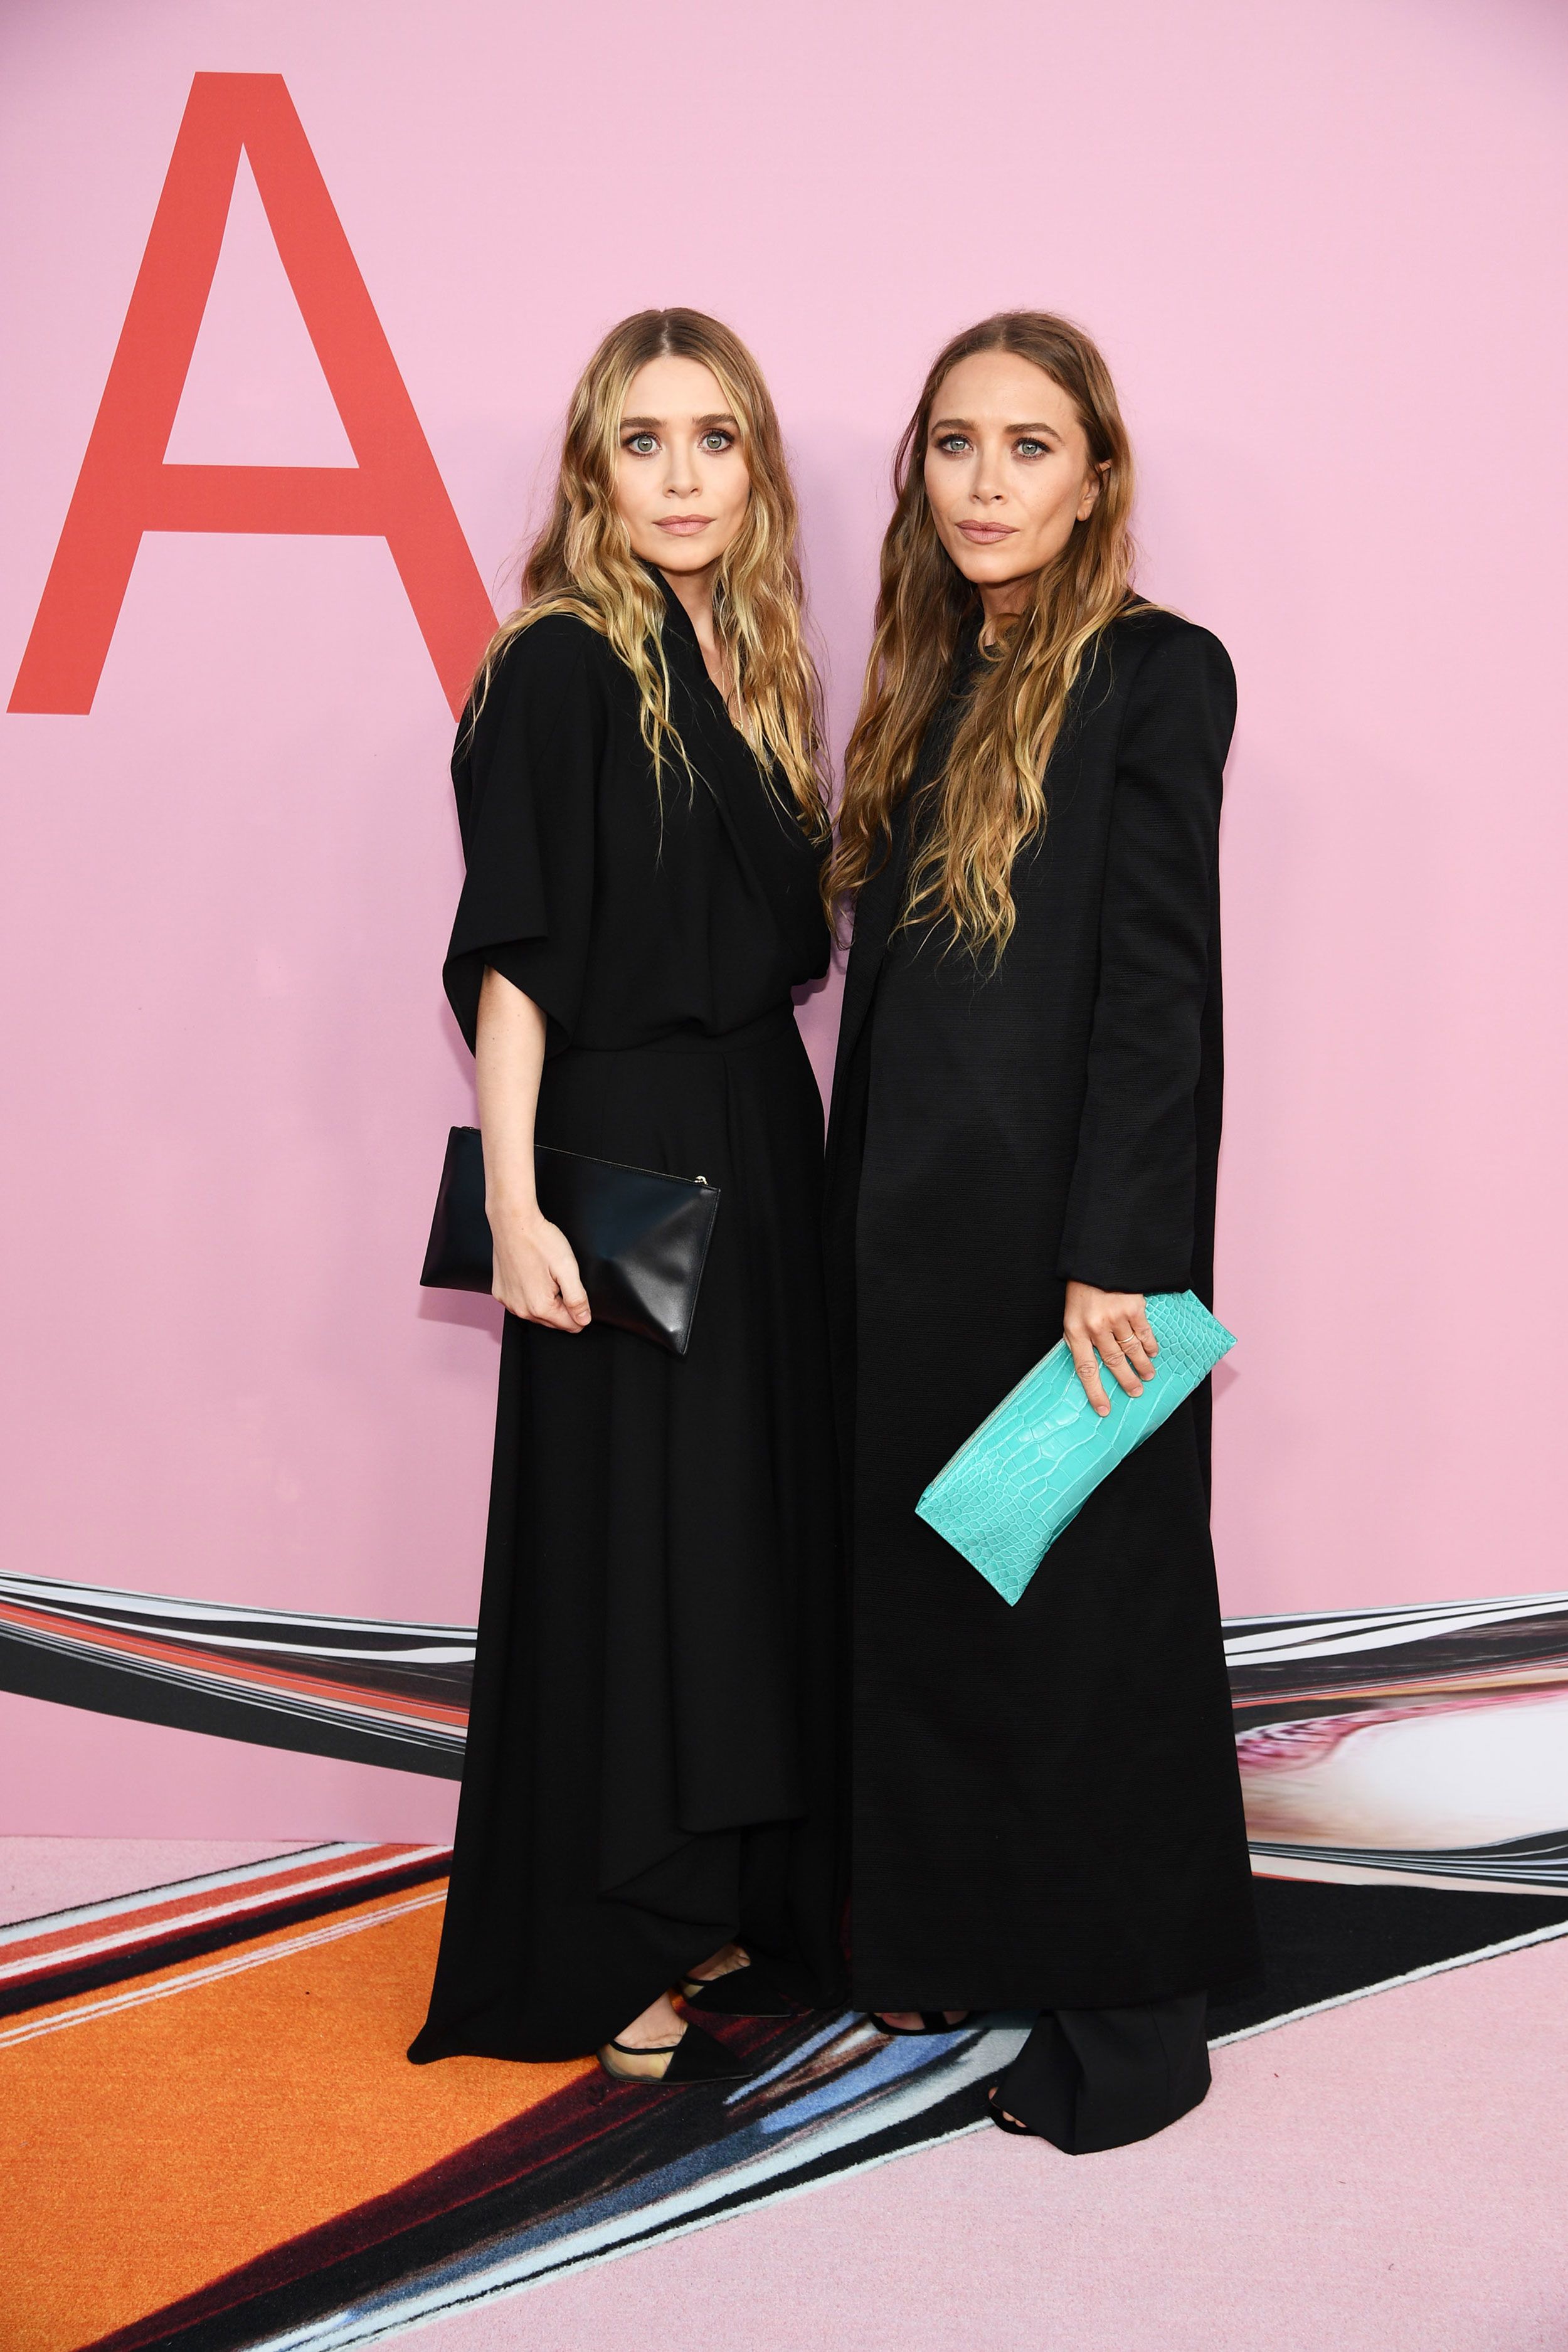 MaryKate Olsen makes rare appearance in colorful outfit CNN